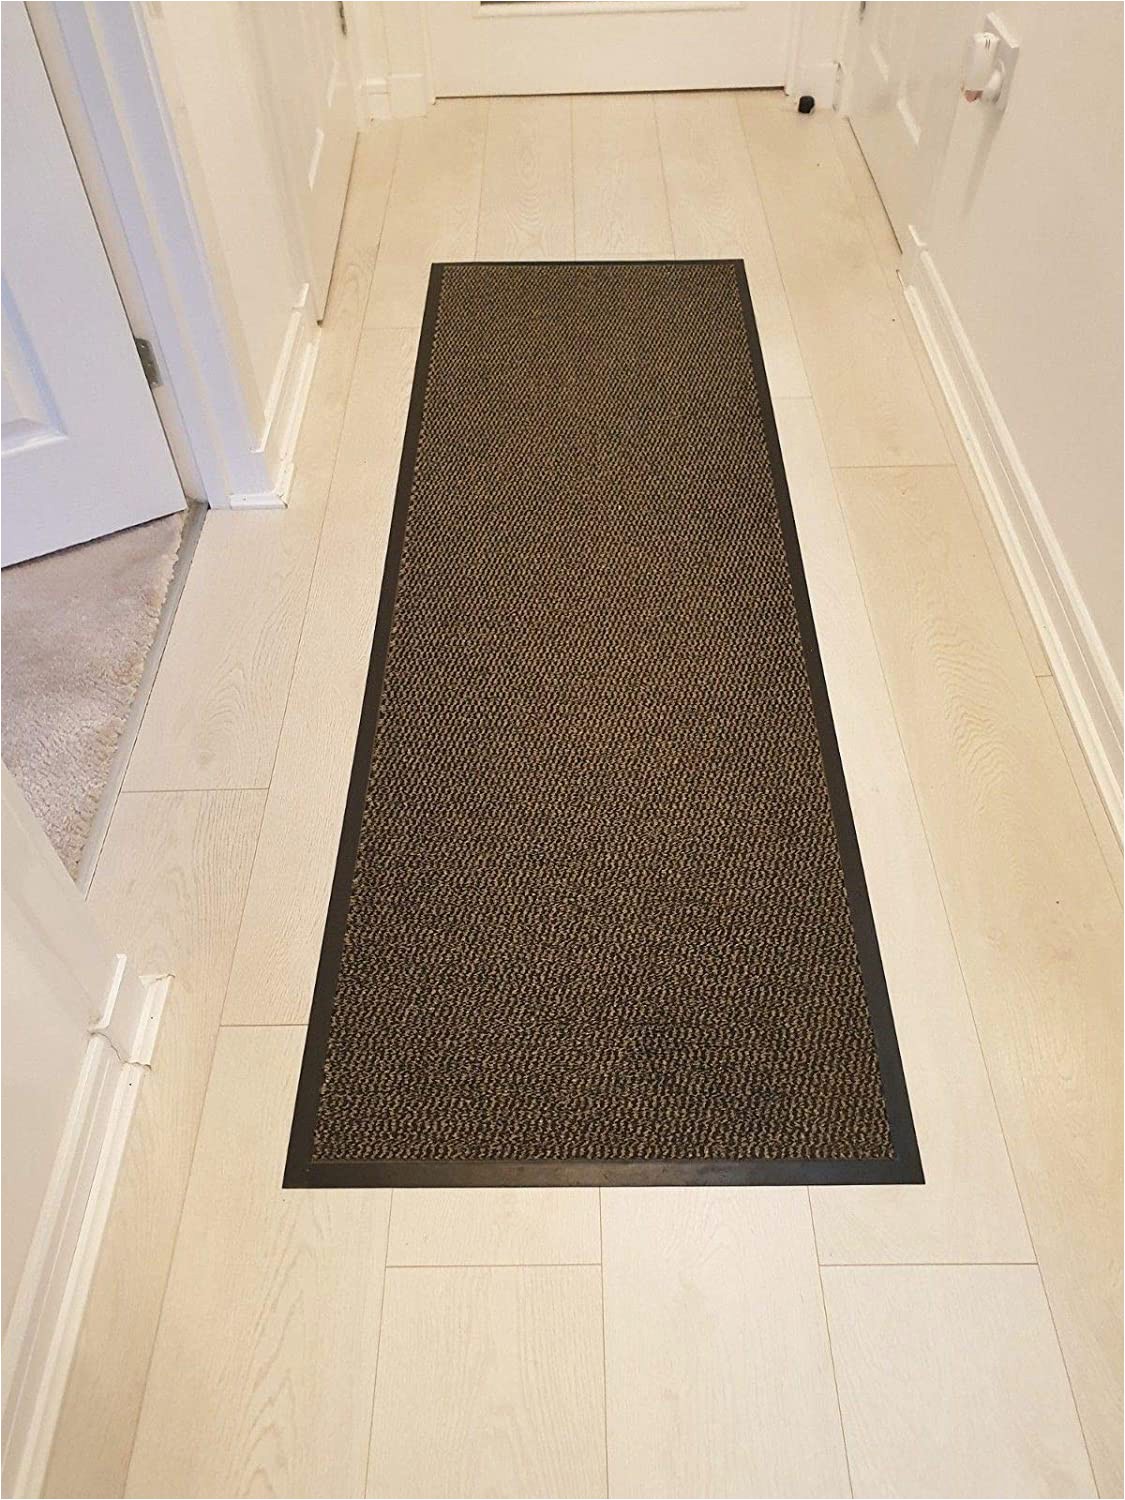 Washable area Rugs with Rubber Backing Wilson Direct Barrier Mats Runners Rugs Heavy Duty Washable Anti Slip Kitchen Hall Doormat Non Slip Rubber Backing Beige Brown 90cm Wide 200cm Long